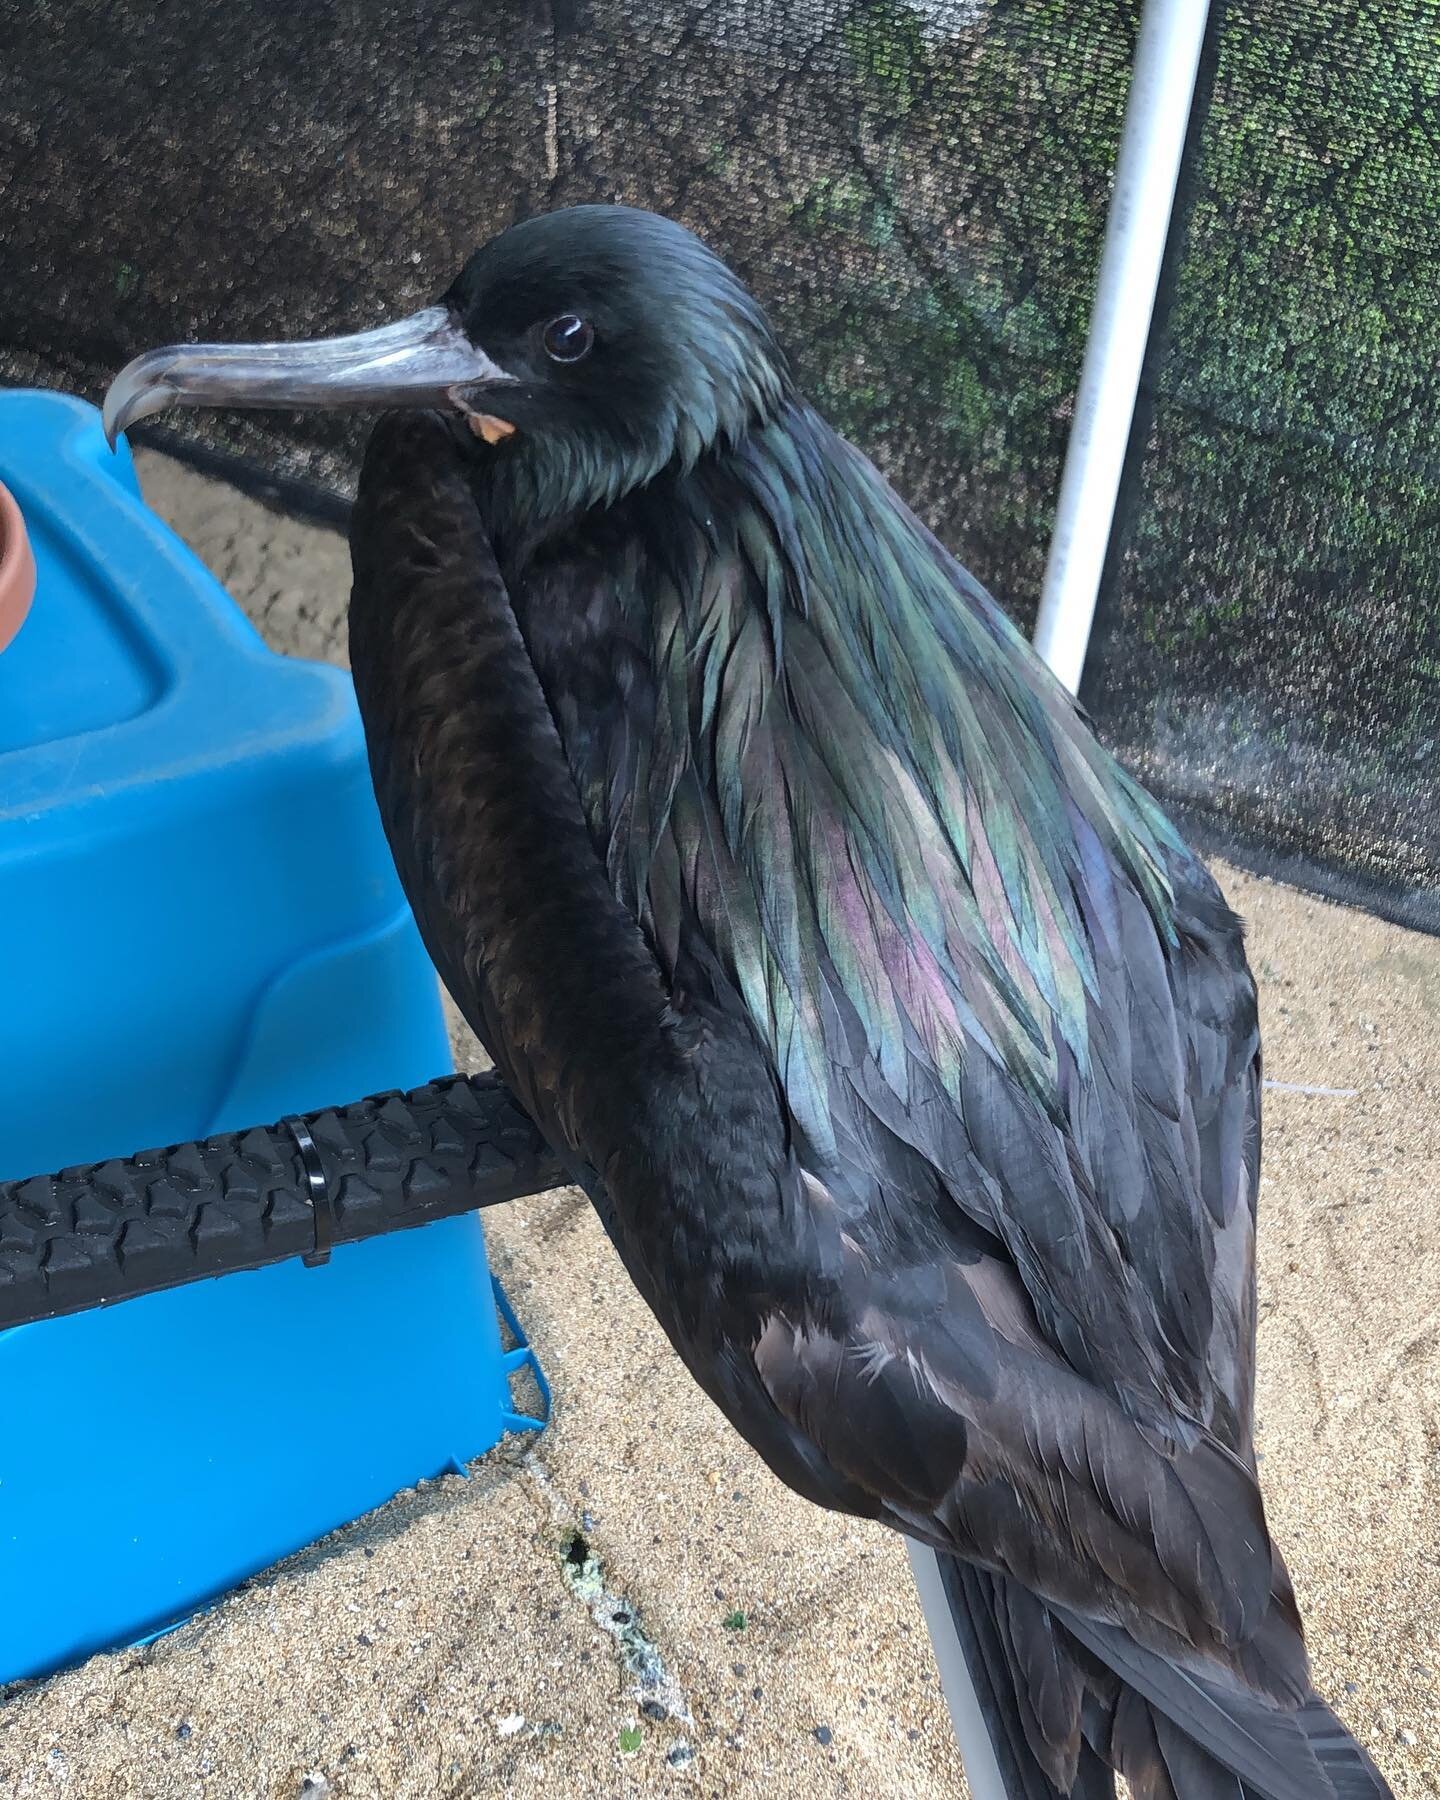 And the answer to What Bird Wednesday is... Great Frigatebird / 'Iwa! MCB074, to be exact 😊 He had tumbled into the ocean while pursuing prey and quickly became waterlogged. A nearby boat crew retrieved him from the water, handed him off to a visito